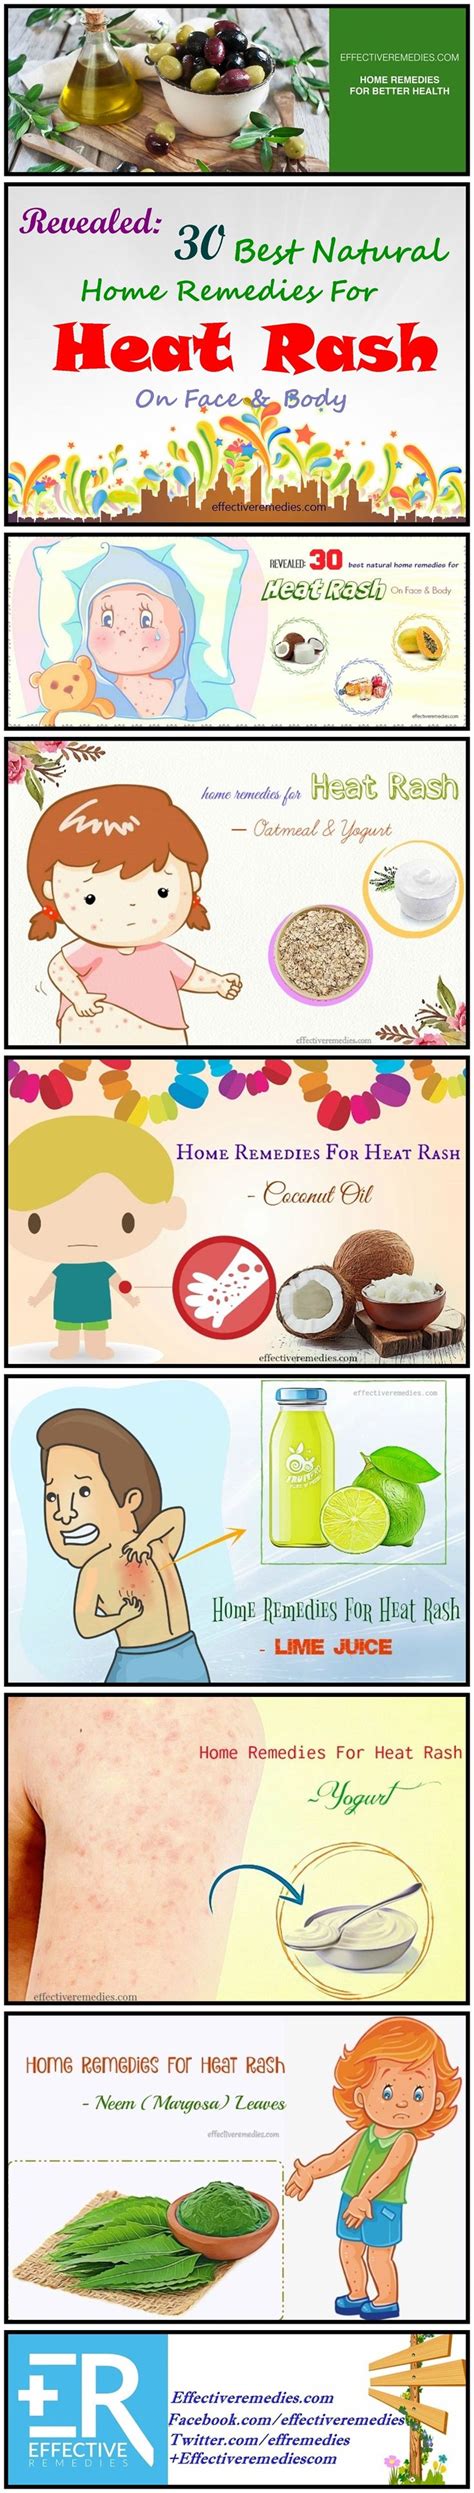 Revealed 30 Best Home Remedies For Heat Rash On Face And Body Heat